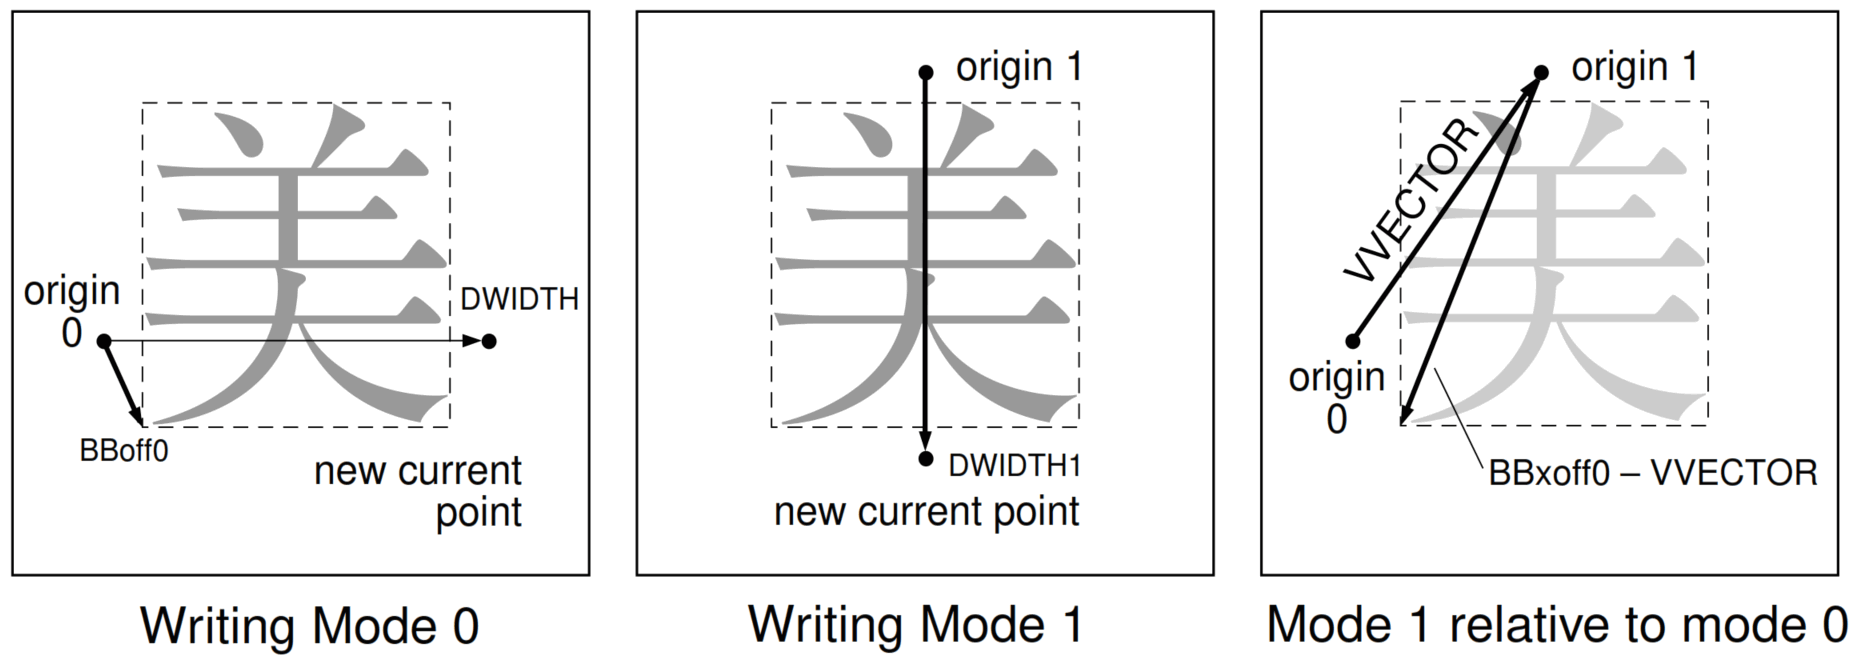 Relationship between metrics for writing direction 0 and 1